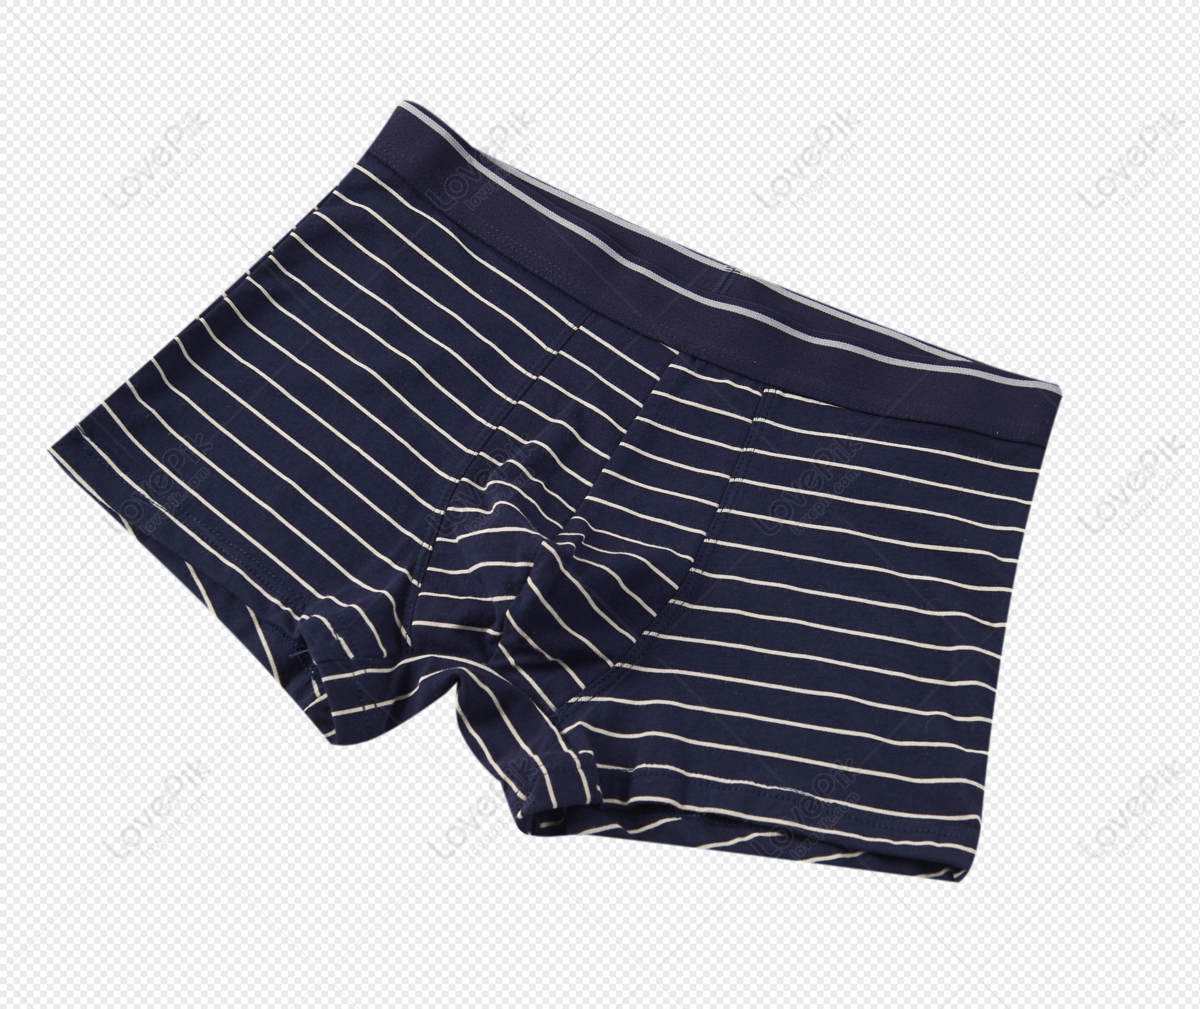 Underwear png images